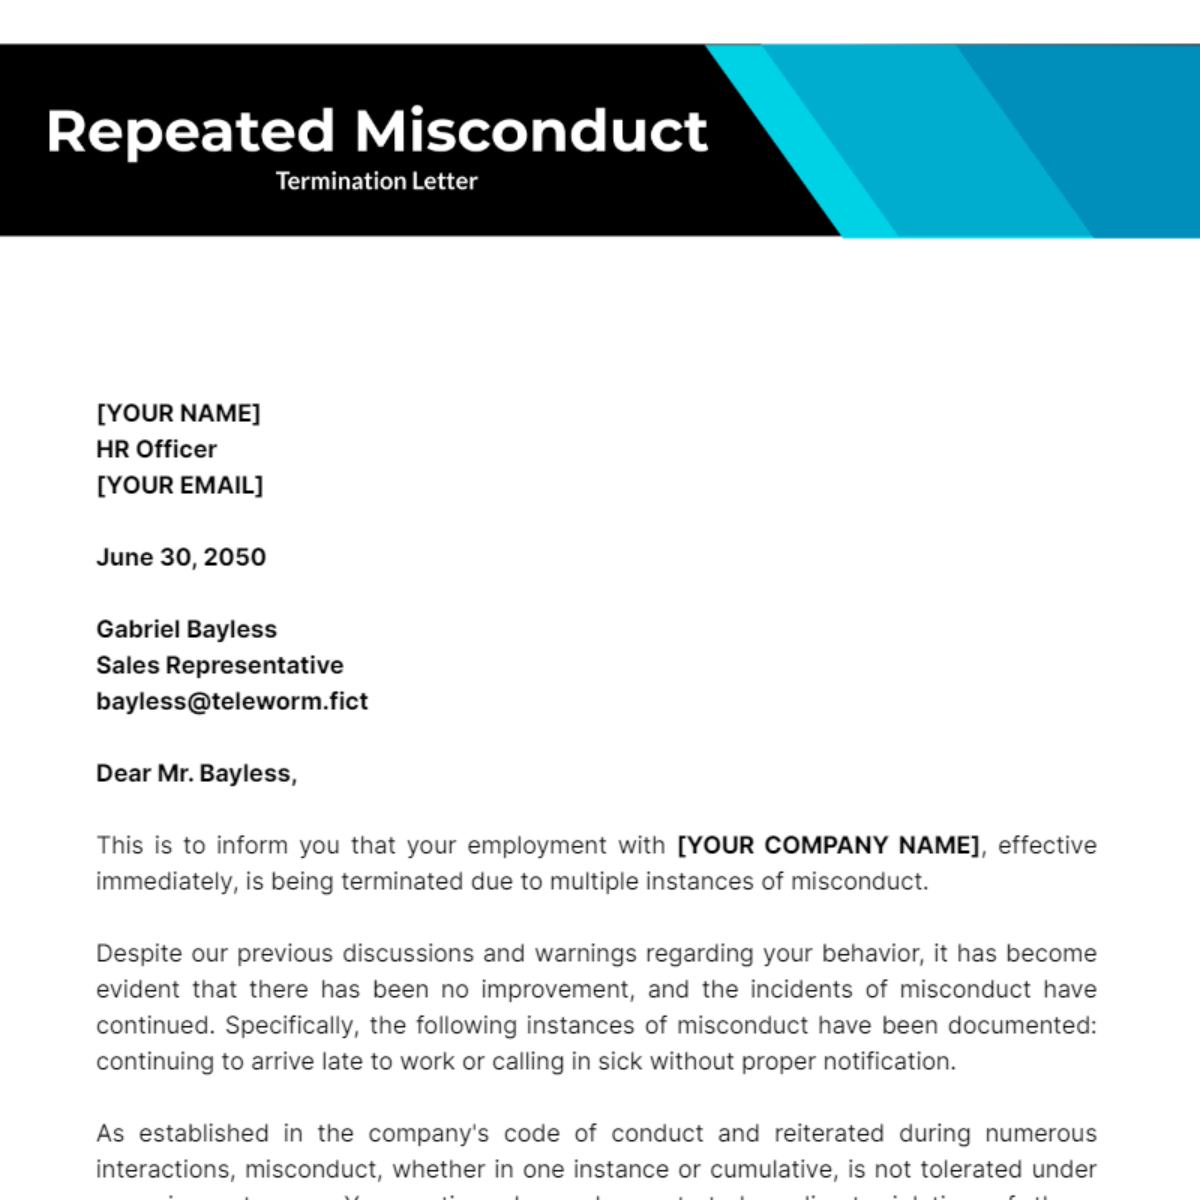 Termination Letter Template Due to Repeated Misconduct